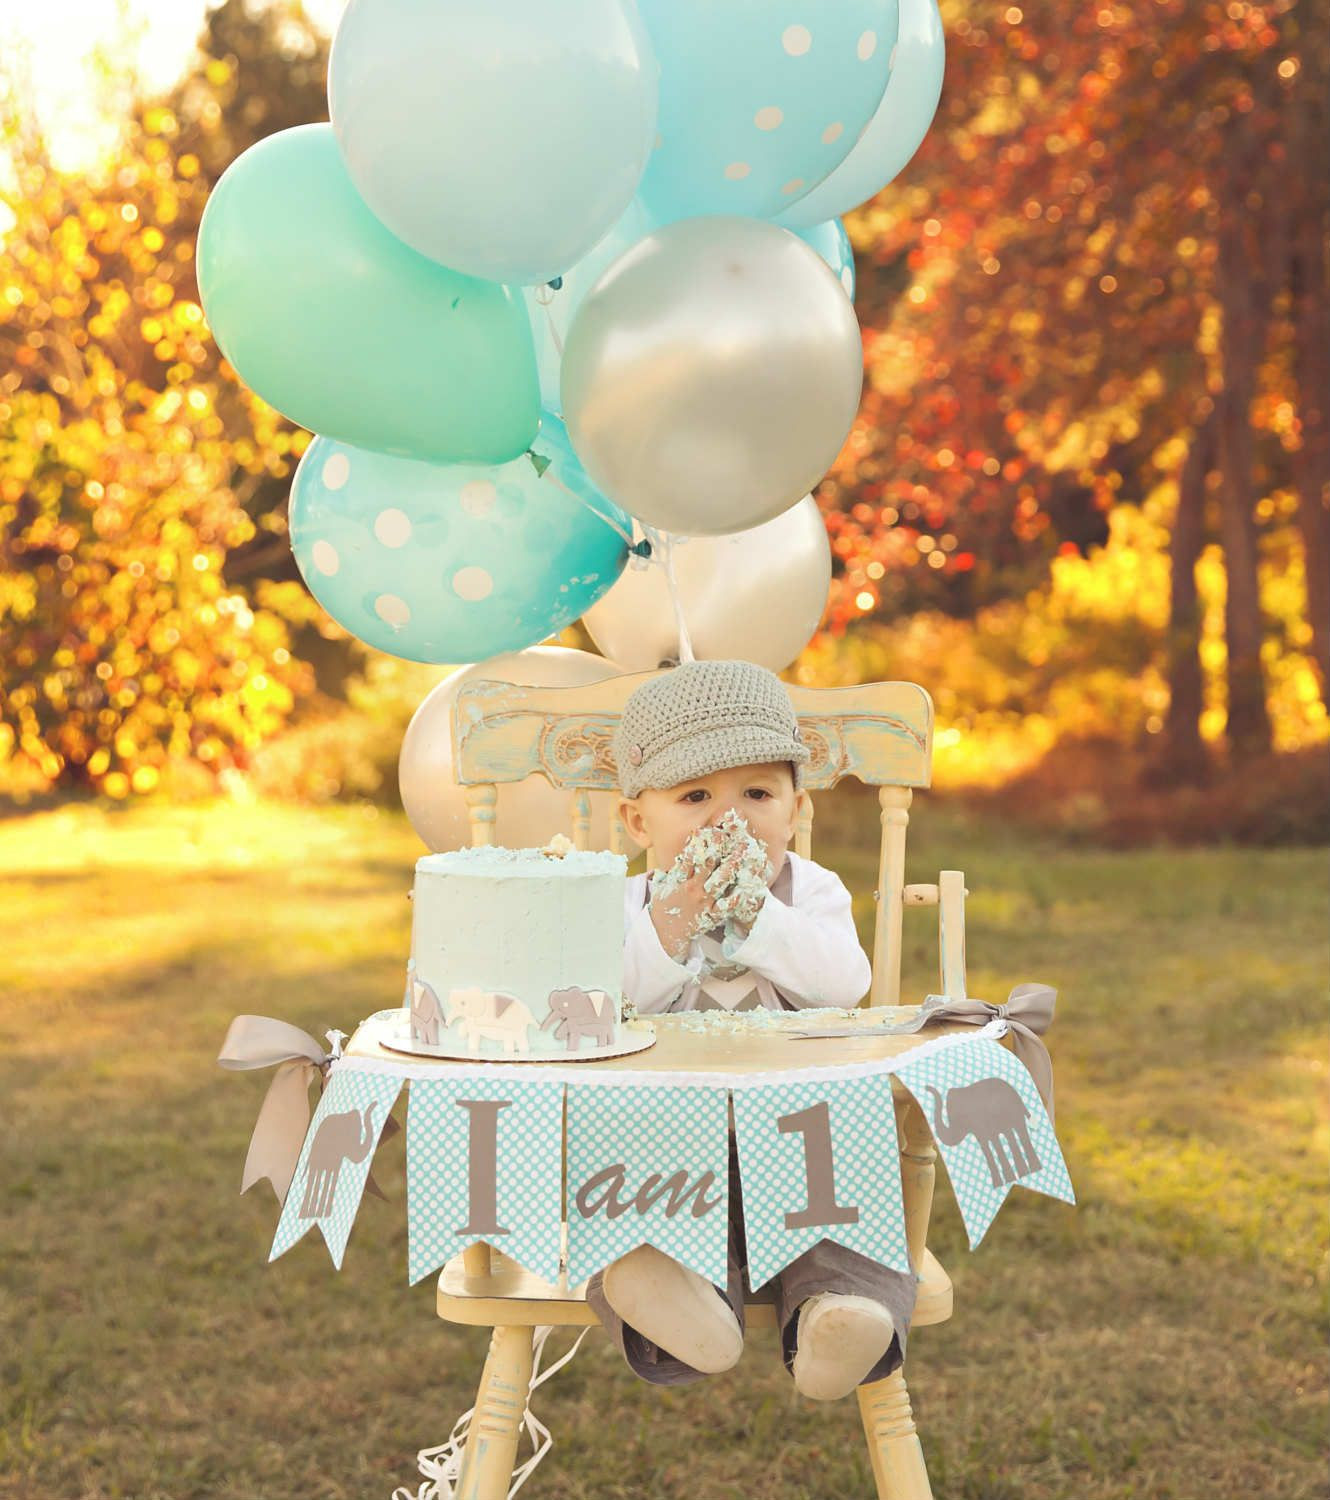 Baby Boys 1St Birthday Party Supplies
 10 1st Birthday Party Ideas for Boys Part 2